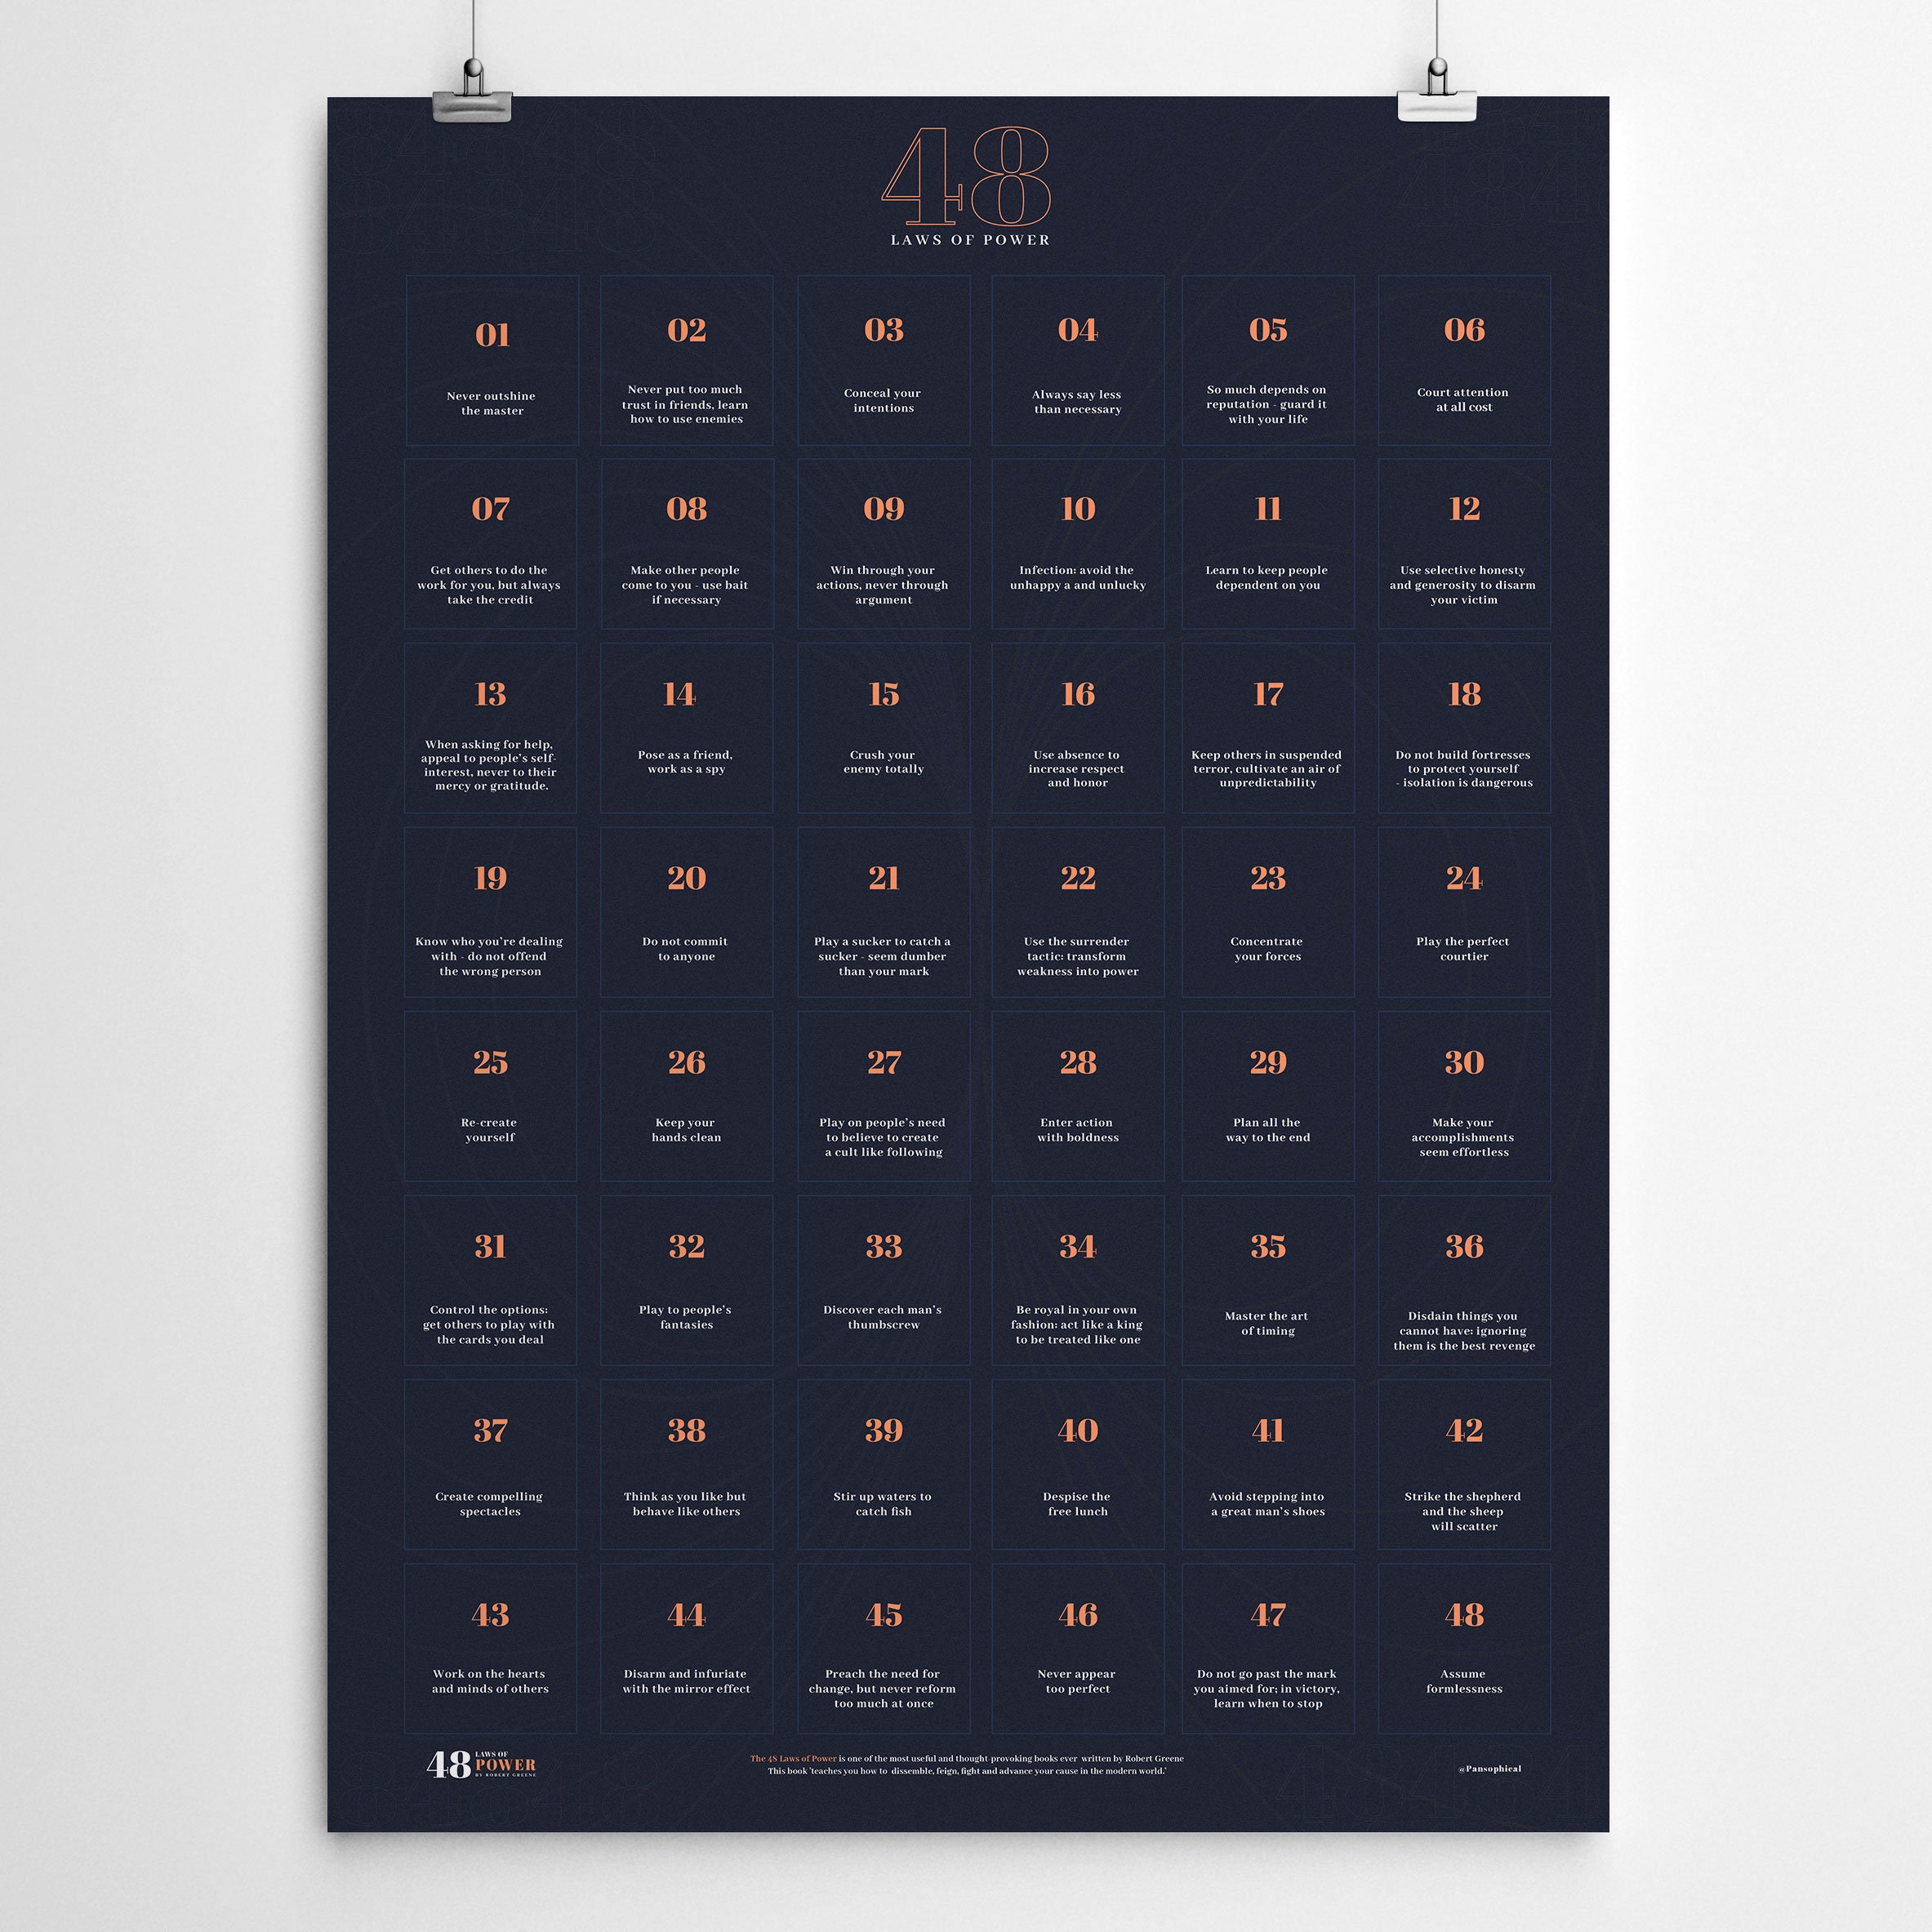 48 Laws of Power by Robert Greene Poster 18x24 Premium Poster